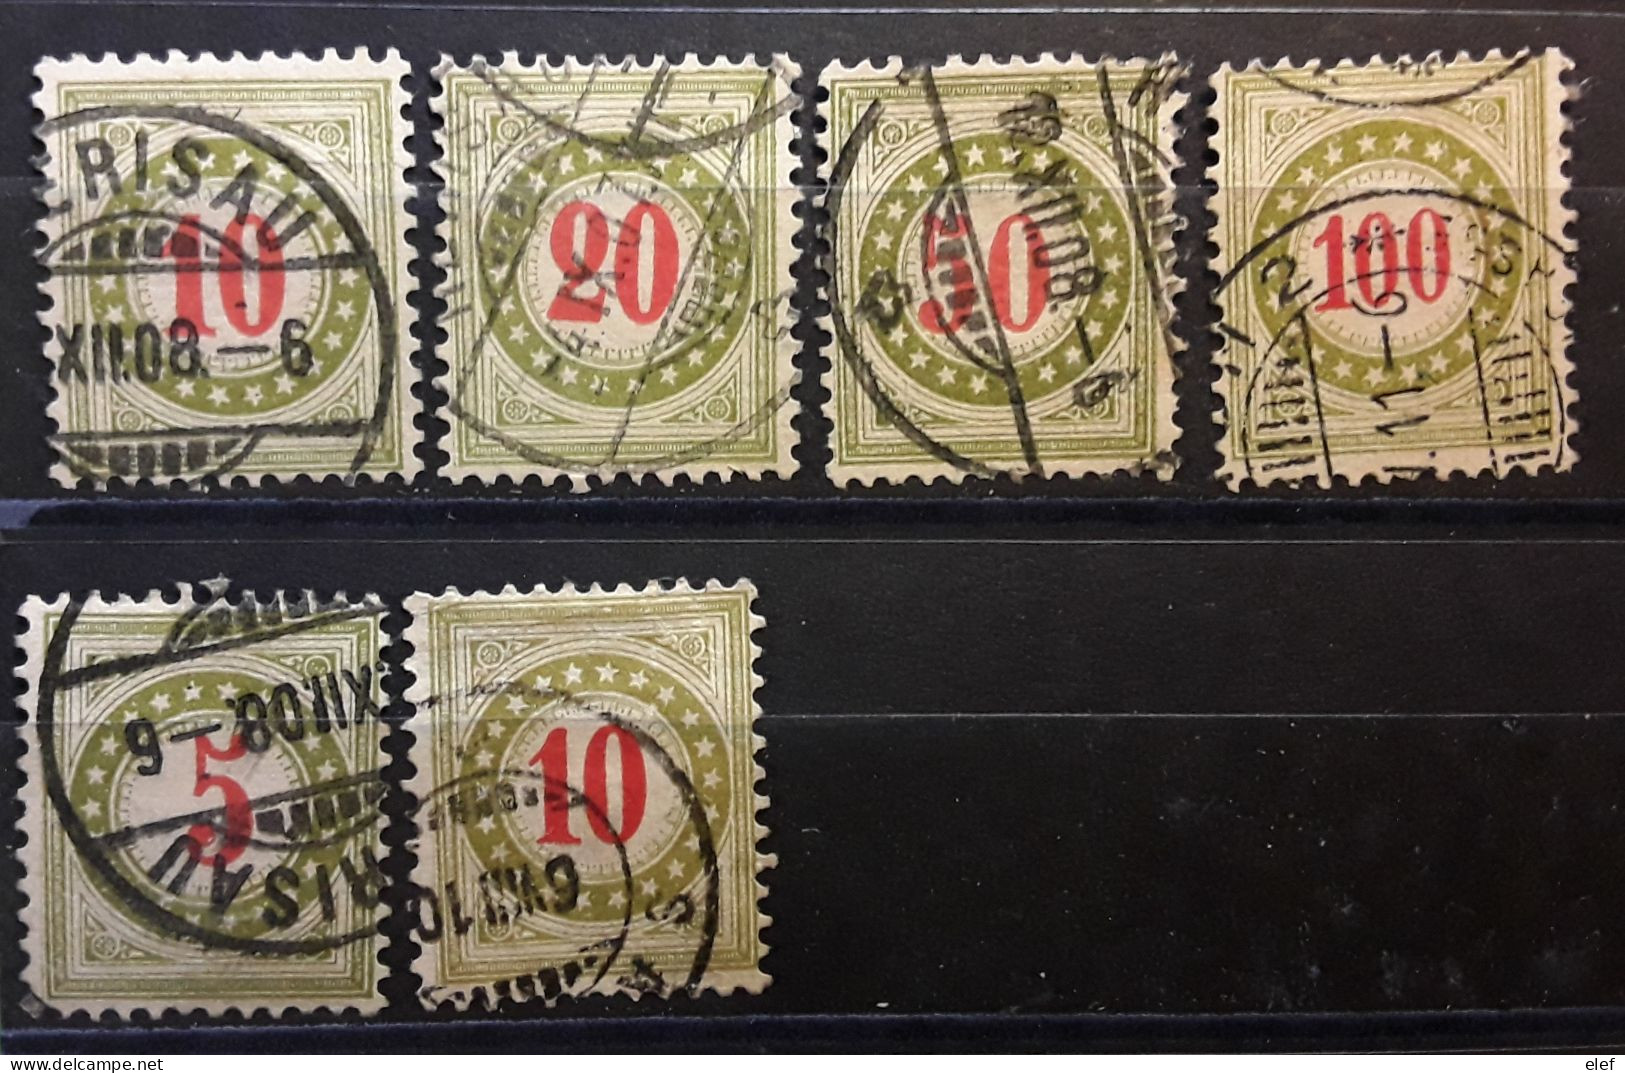 SUISSE SCHWEIZ Taxe Porto Marke 1897 - 1908 , 6 Timbres Yvert No 31 / 34 + 37, 38, Obl TB - Postage Due